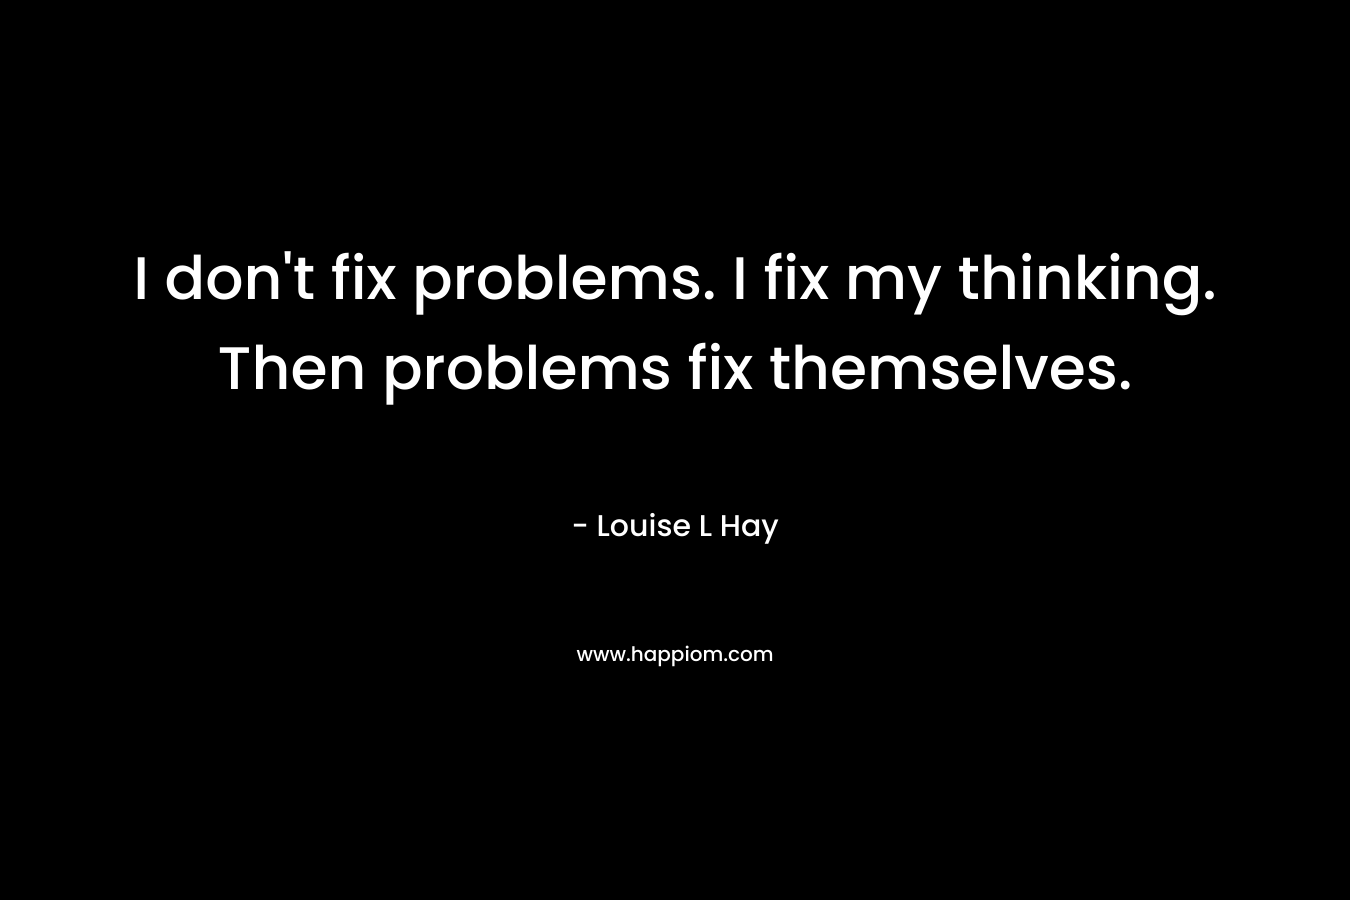 I don't fix problems. I fix my thinking. Then problems fix themselves.